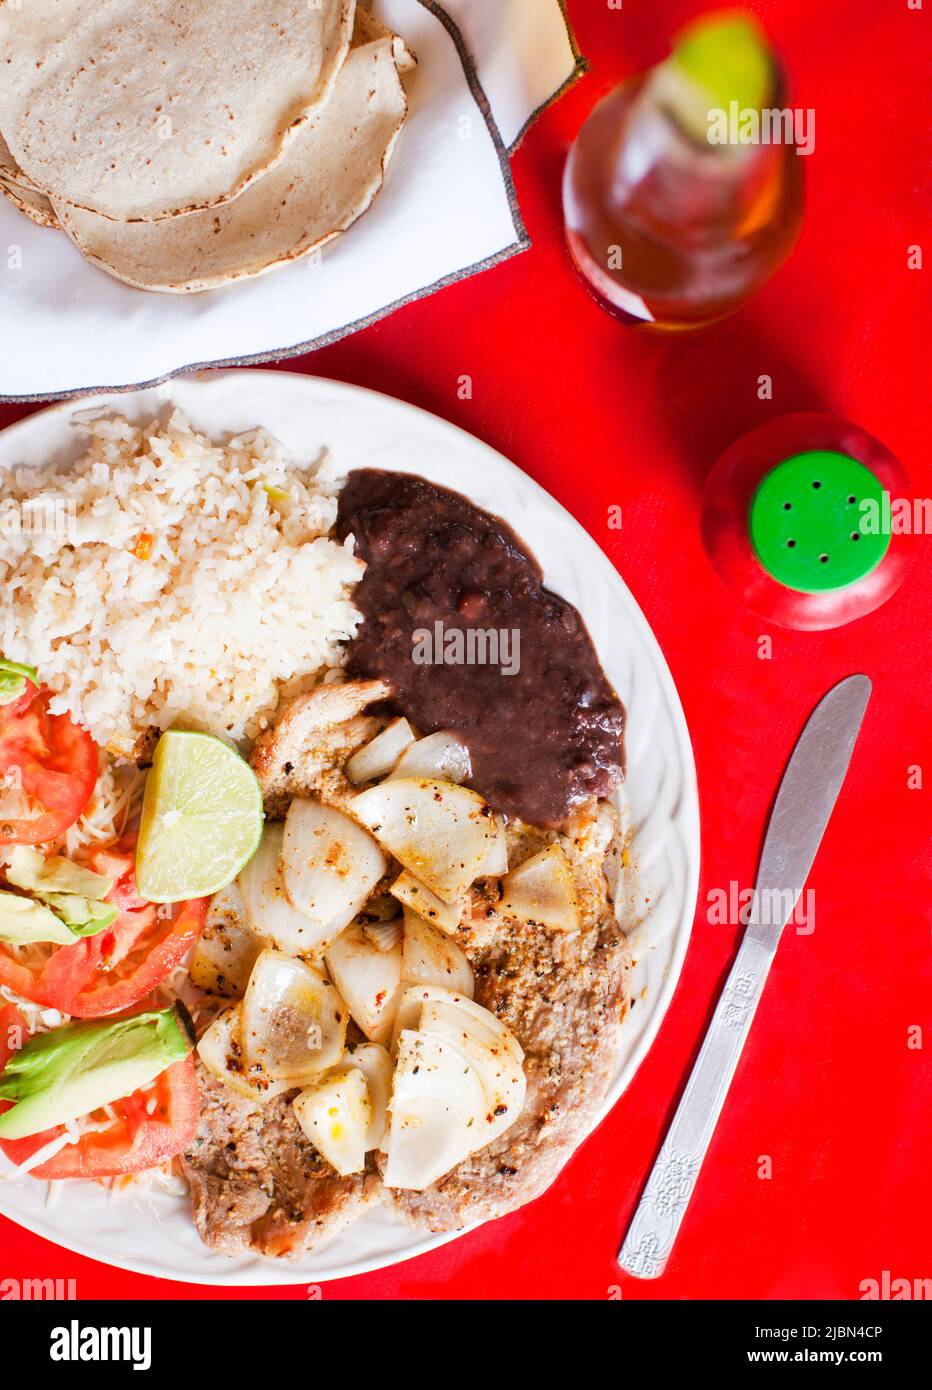 Poc Choc, a signature pork dish with onions, is the best-selling dish at Loncheria El Poc-Choc in downtown Isla Mujeres, Quintana Roo, Mexico. Stock Photo